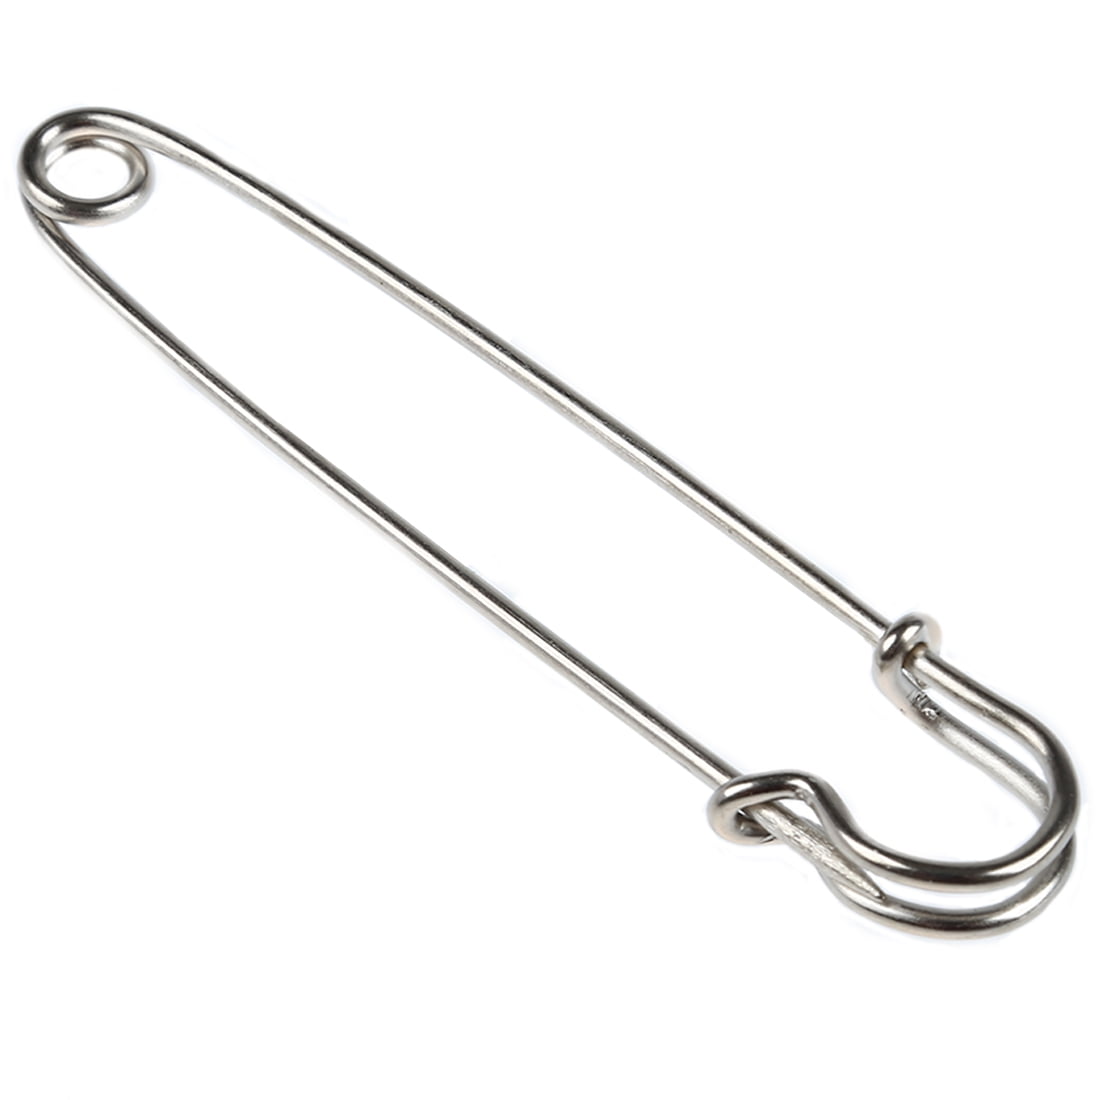 4pc Extra Large Safety Pins,Giant Strong Safety Pin Metal Heavy